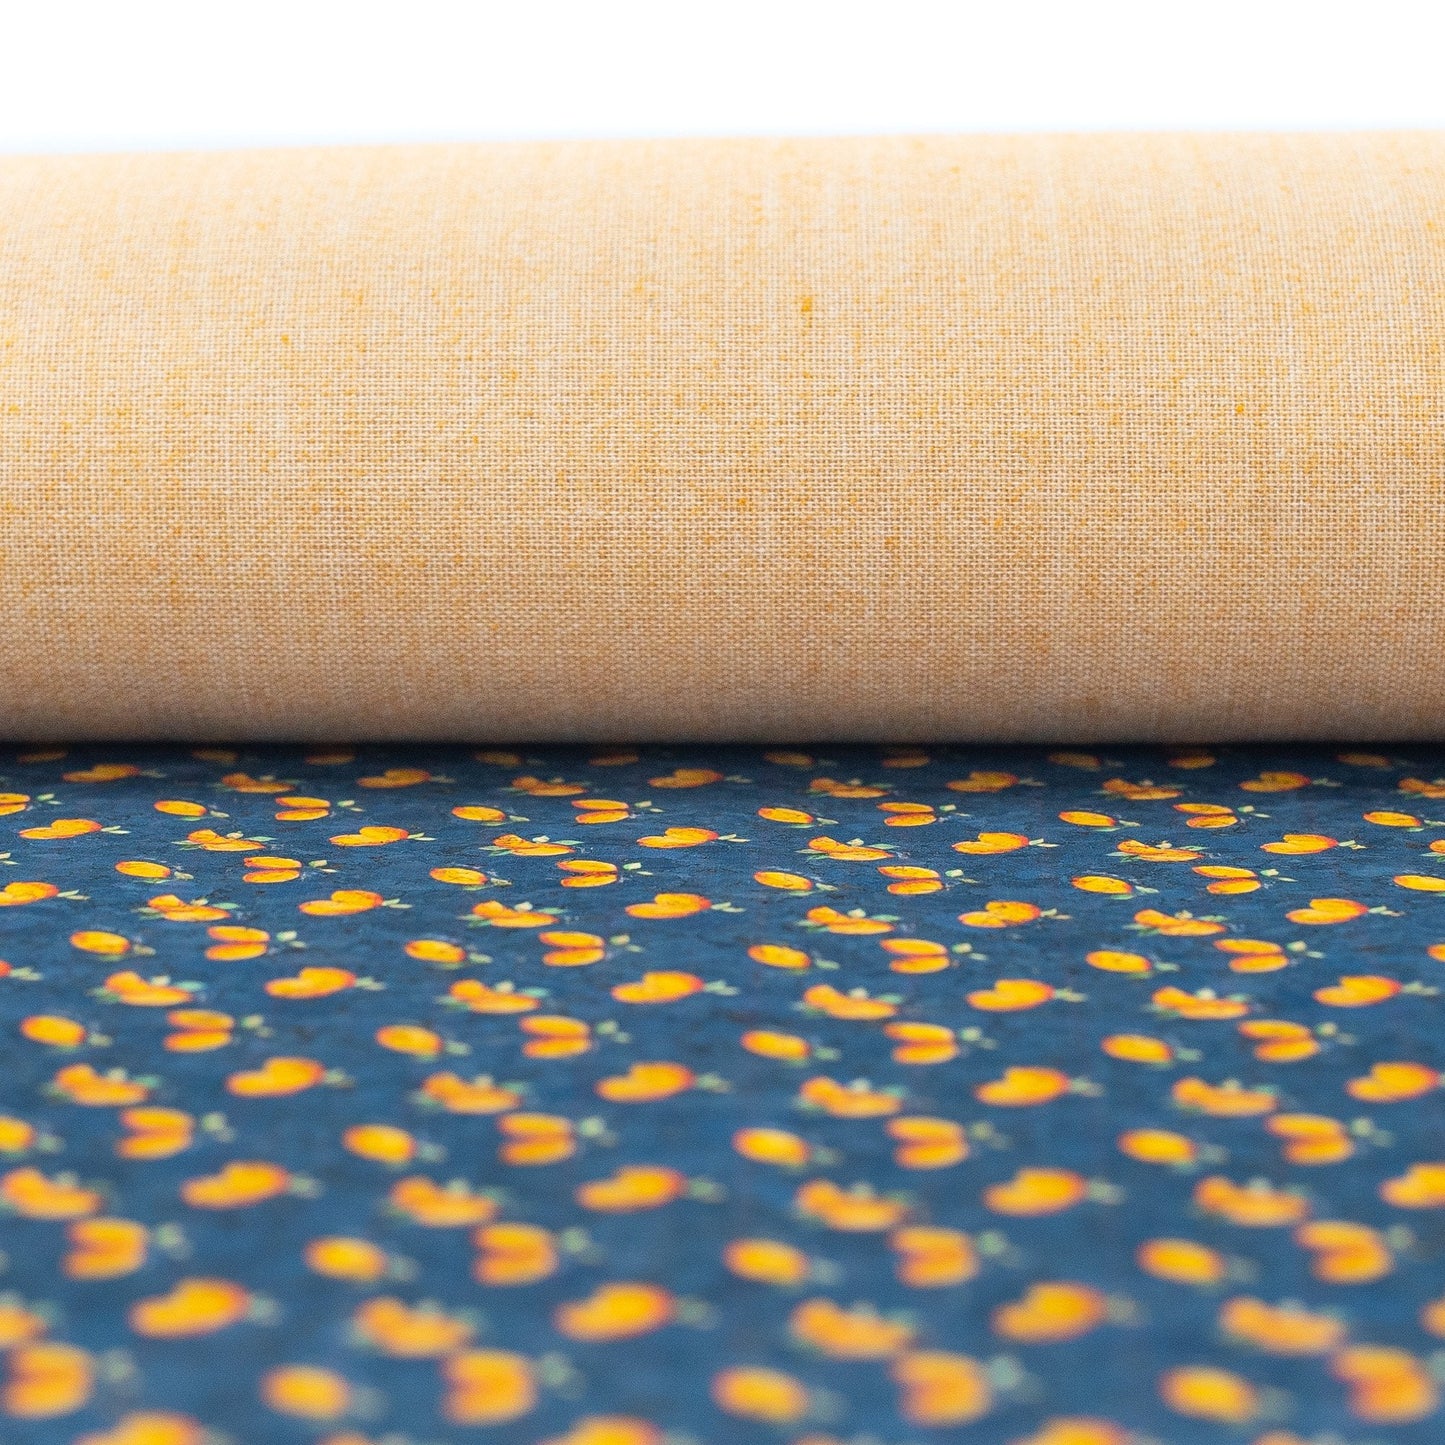 Fruity Lime & Blue Printed Vegan Cork Fabric | THE CORK COLLECTION